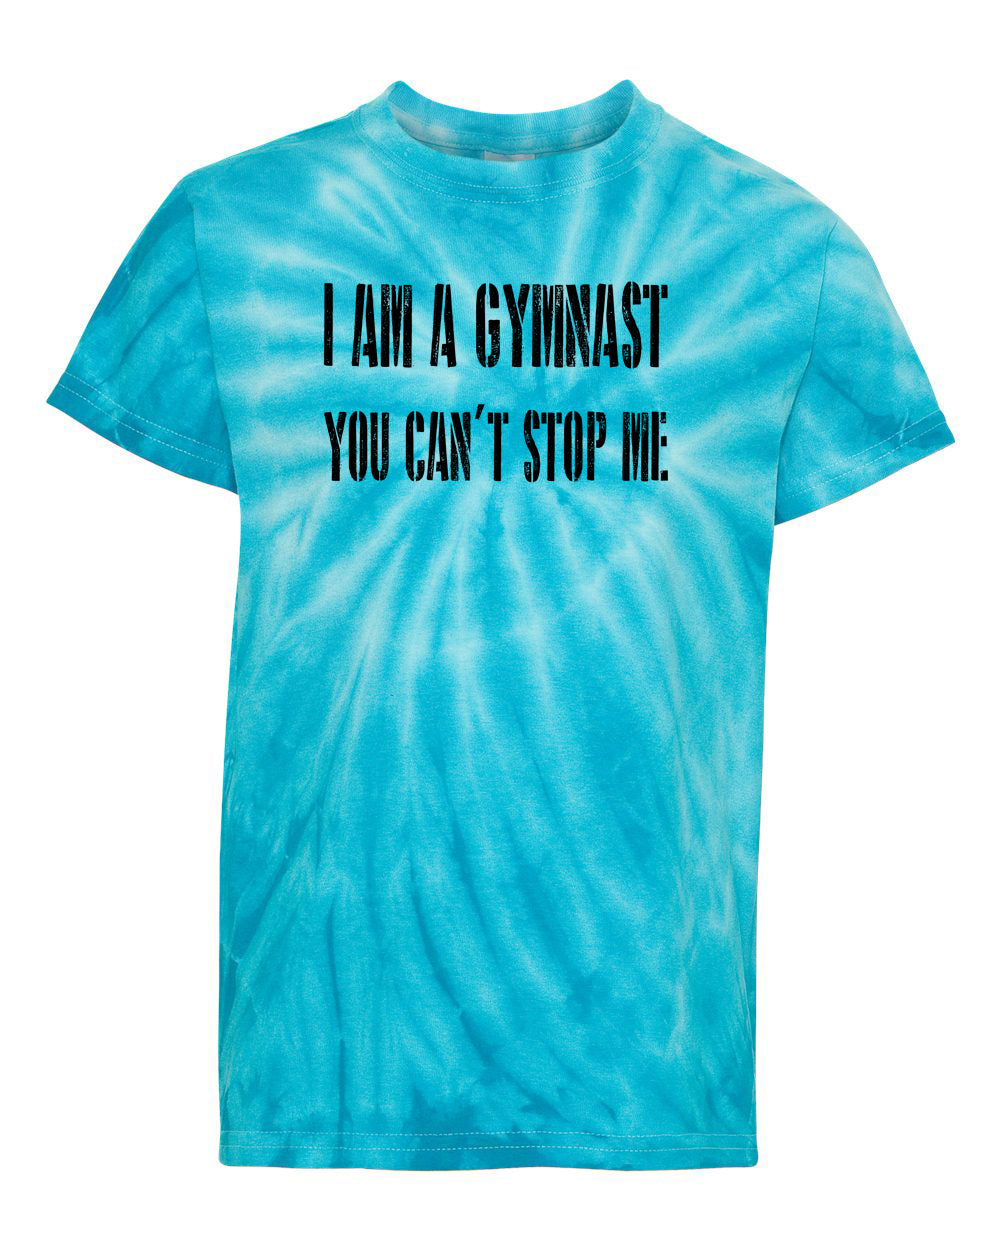 I Am A Gymnast You Can't Stop Me Adult Tie Dye T-Shirt Turquoise